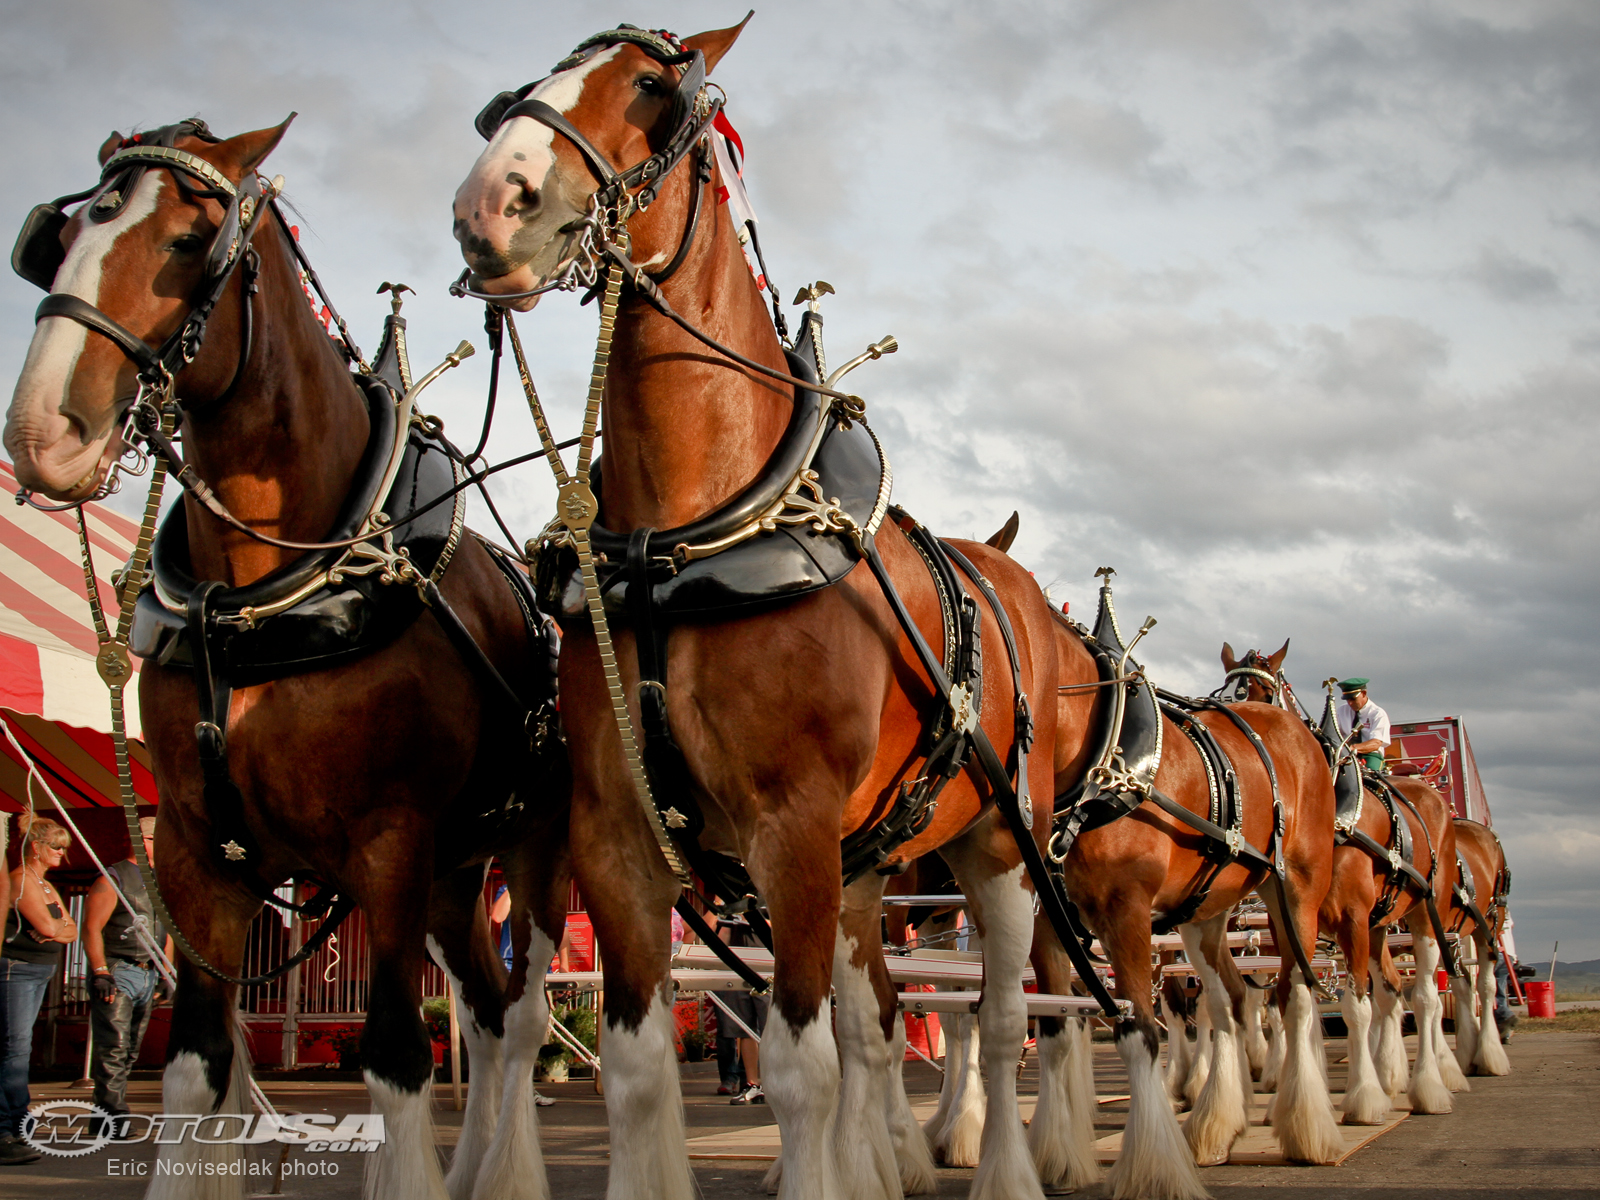 Budweiser Clydesdale Horses Wallpaper The Clydesdales